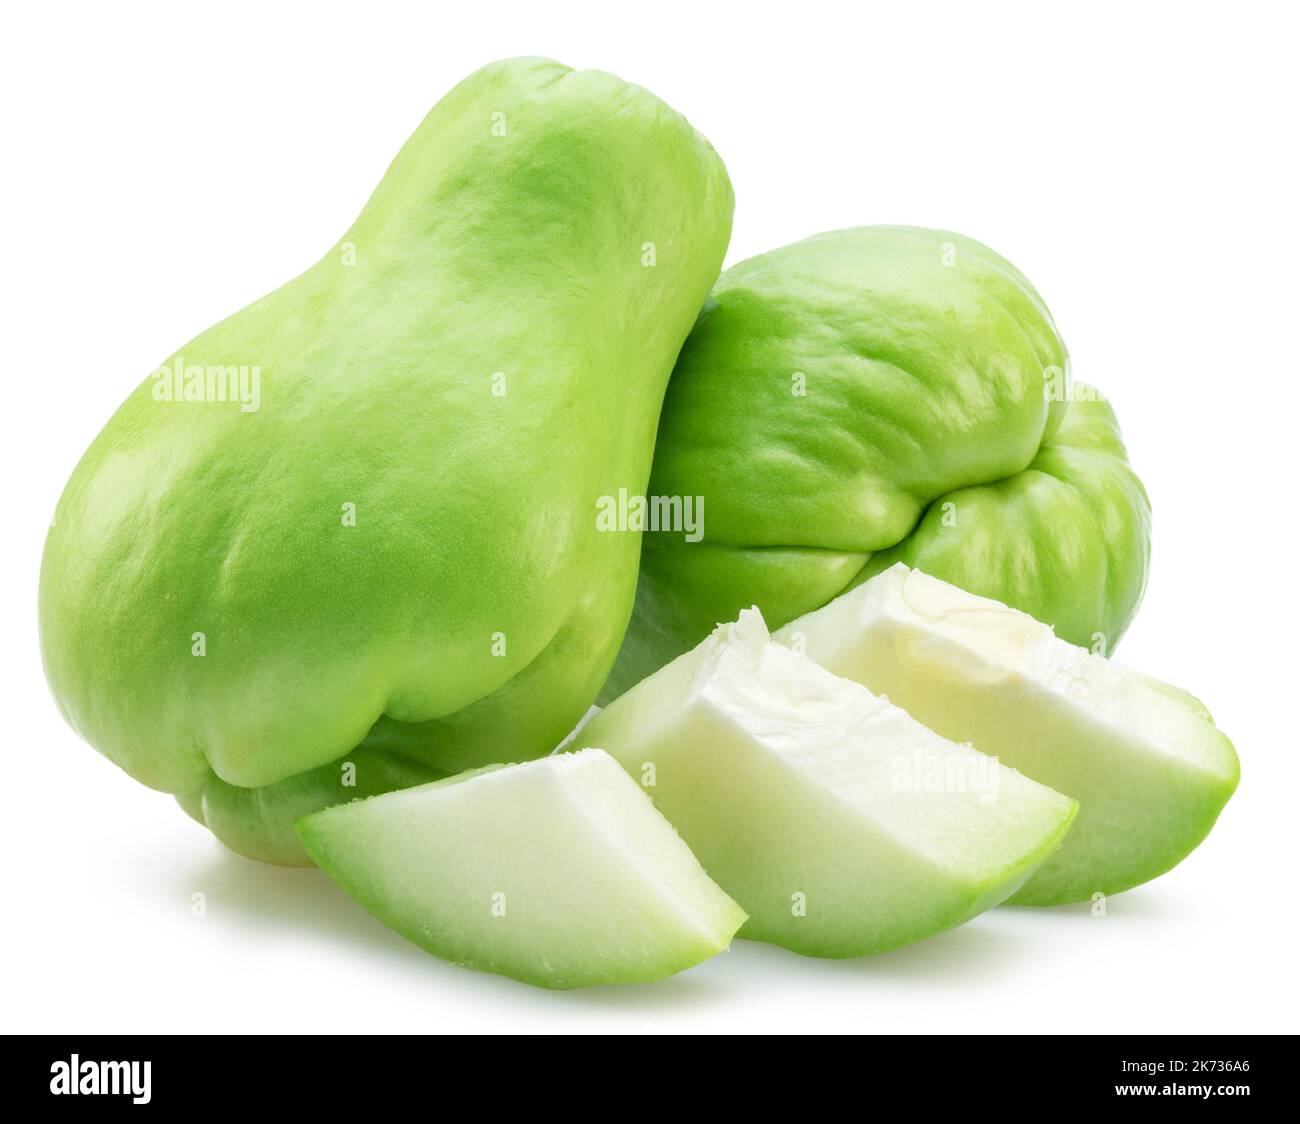 Chayote fruits and chayote slices isolated on white background. Stock Photo